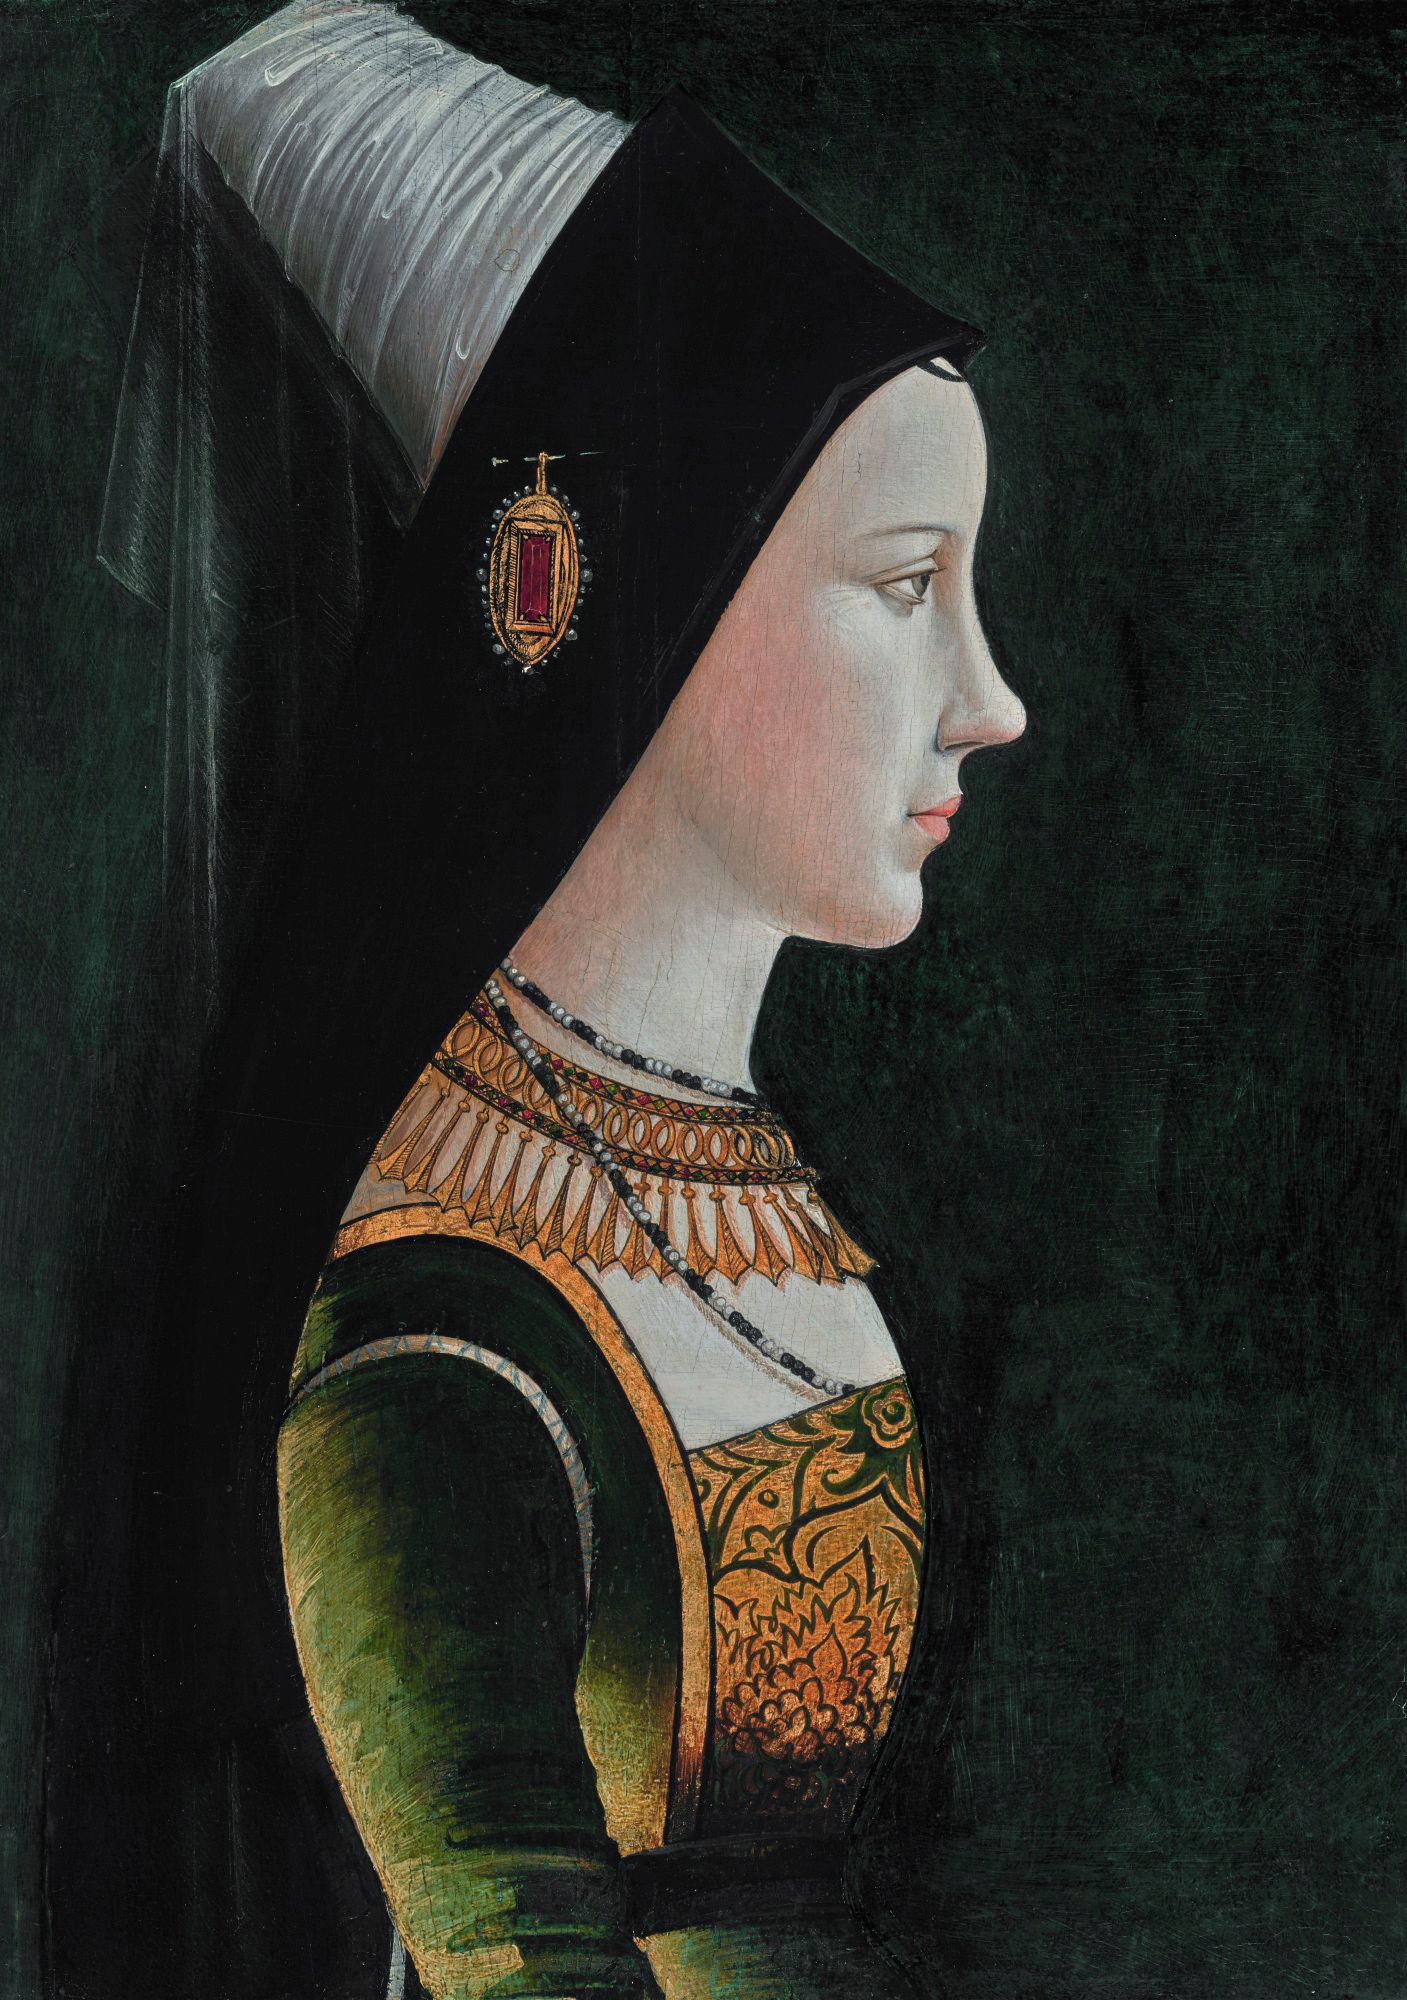 Portrait of Mary of Burgundy, 1458-1482, sold at Sotheby's in 2018.